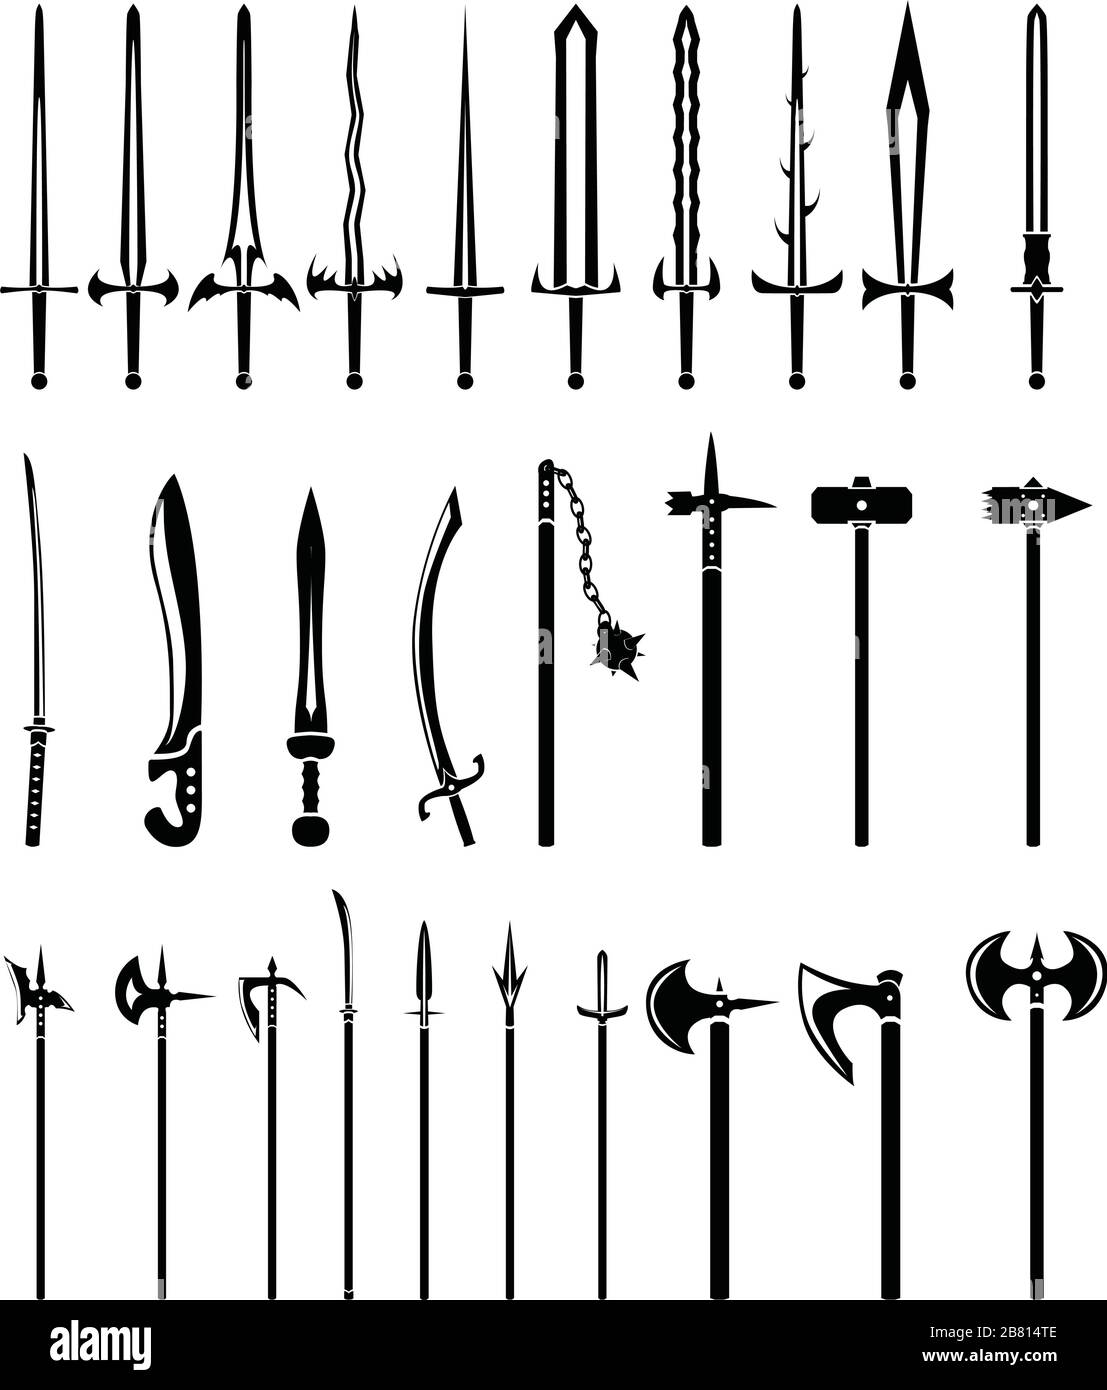 Illustration of melee weapon icons set, both realistic and fantastic, only black, isolated shapes and grouped by weapon. Stock Vector